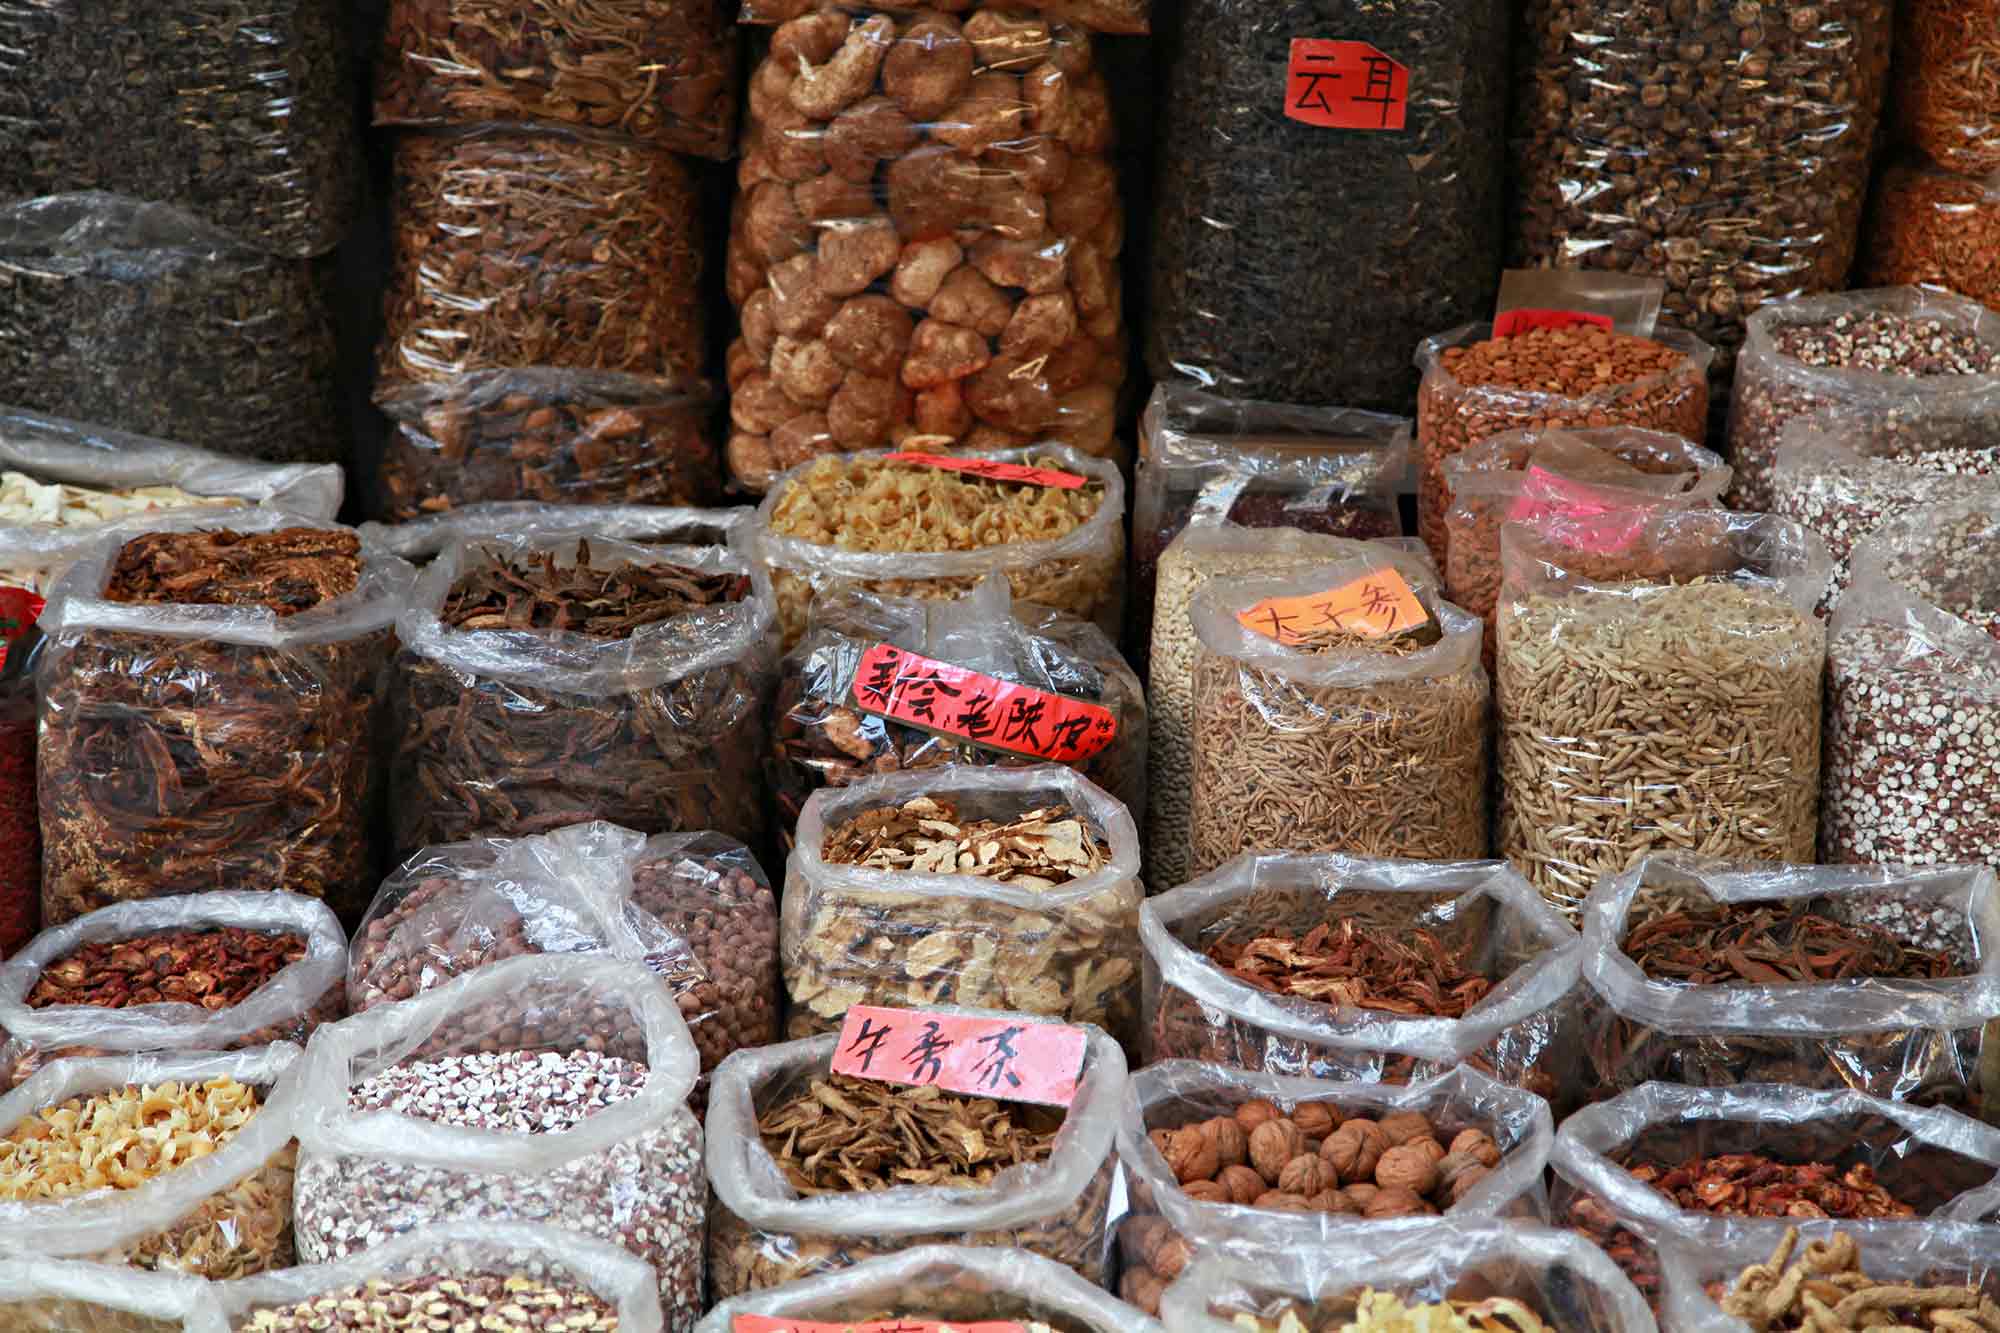 Ingredients for Chinese medicine. © Ulli Maier & Nisa Maier